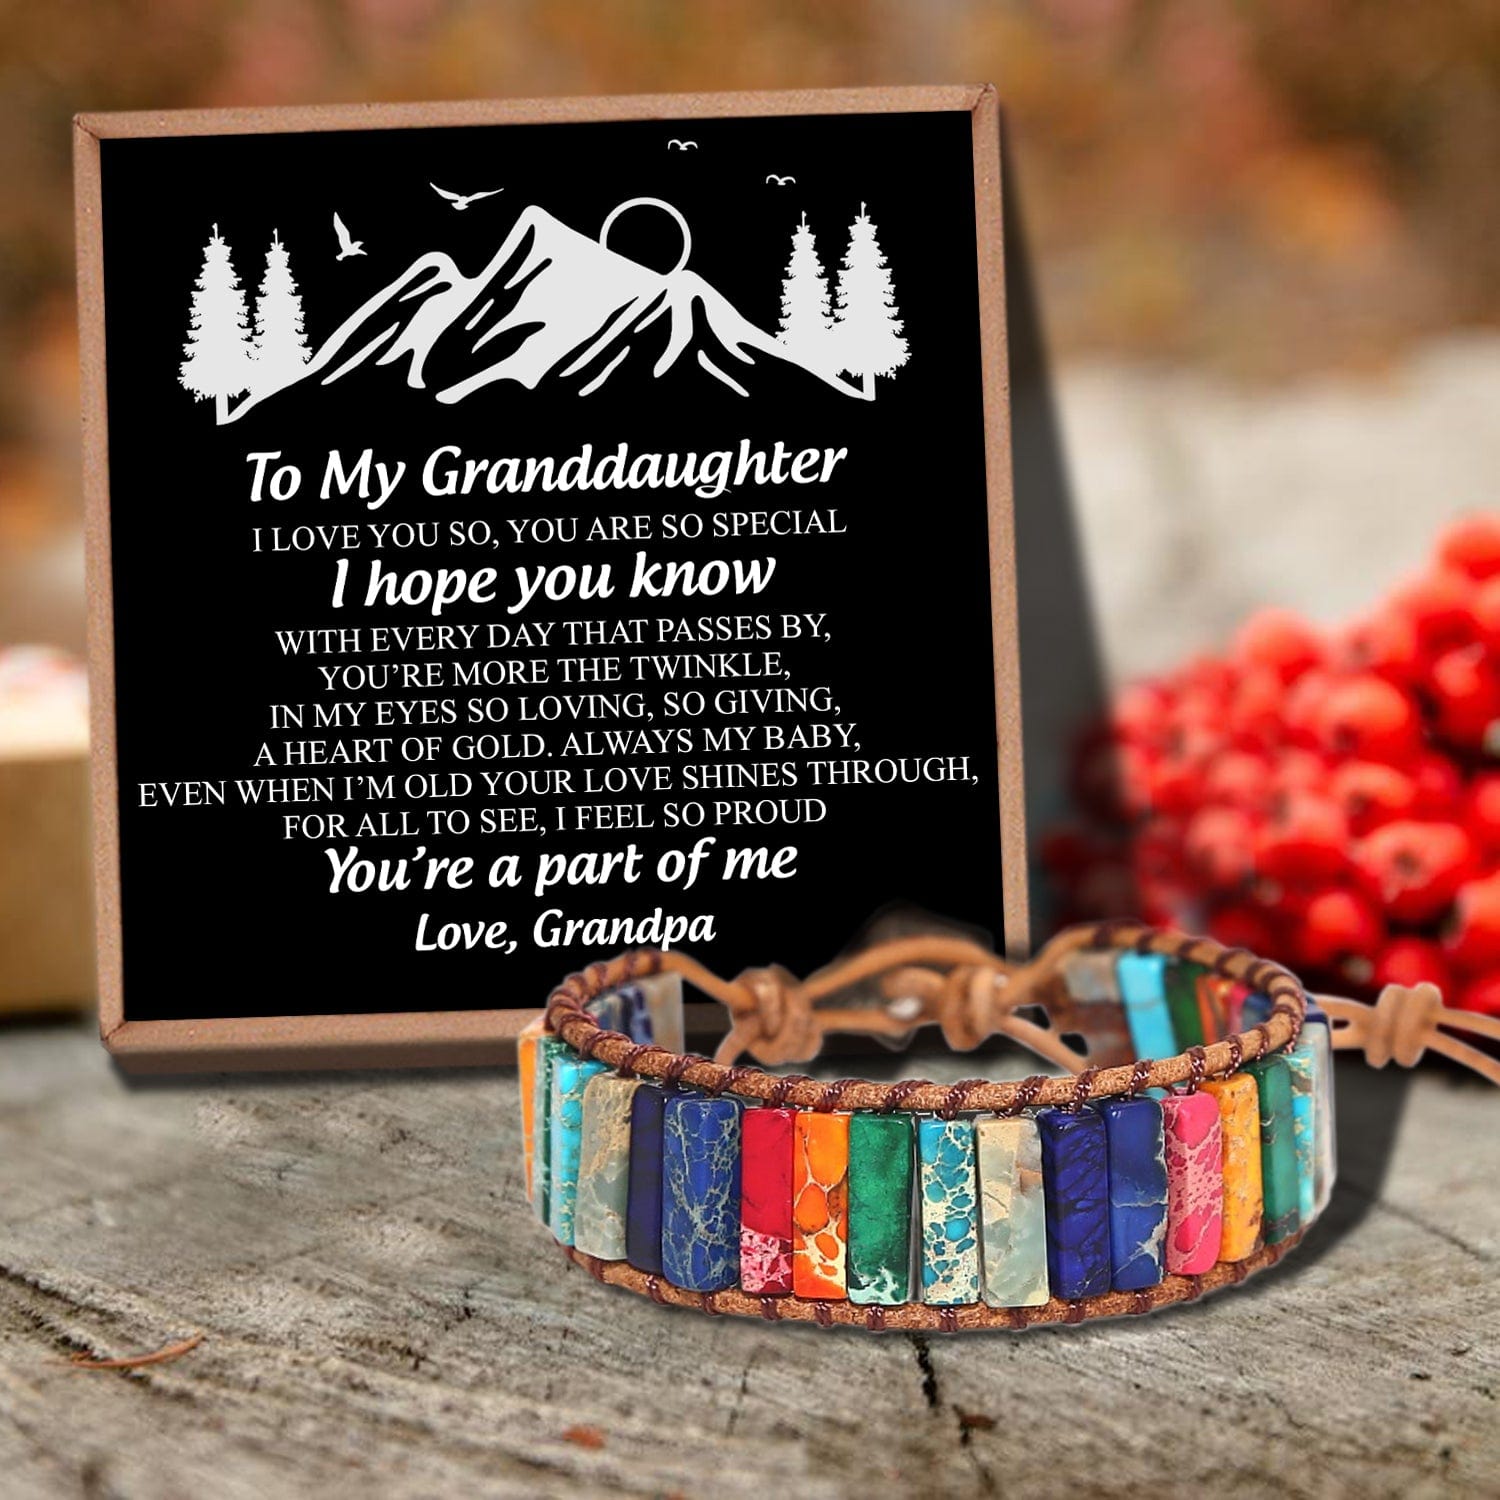 Bracelets For Granddaughter Grandpa To Granddaughter - You Are A Part Of Me Gemstones Chakra Bracelet GiveMe-Gifts